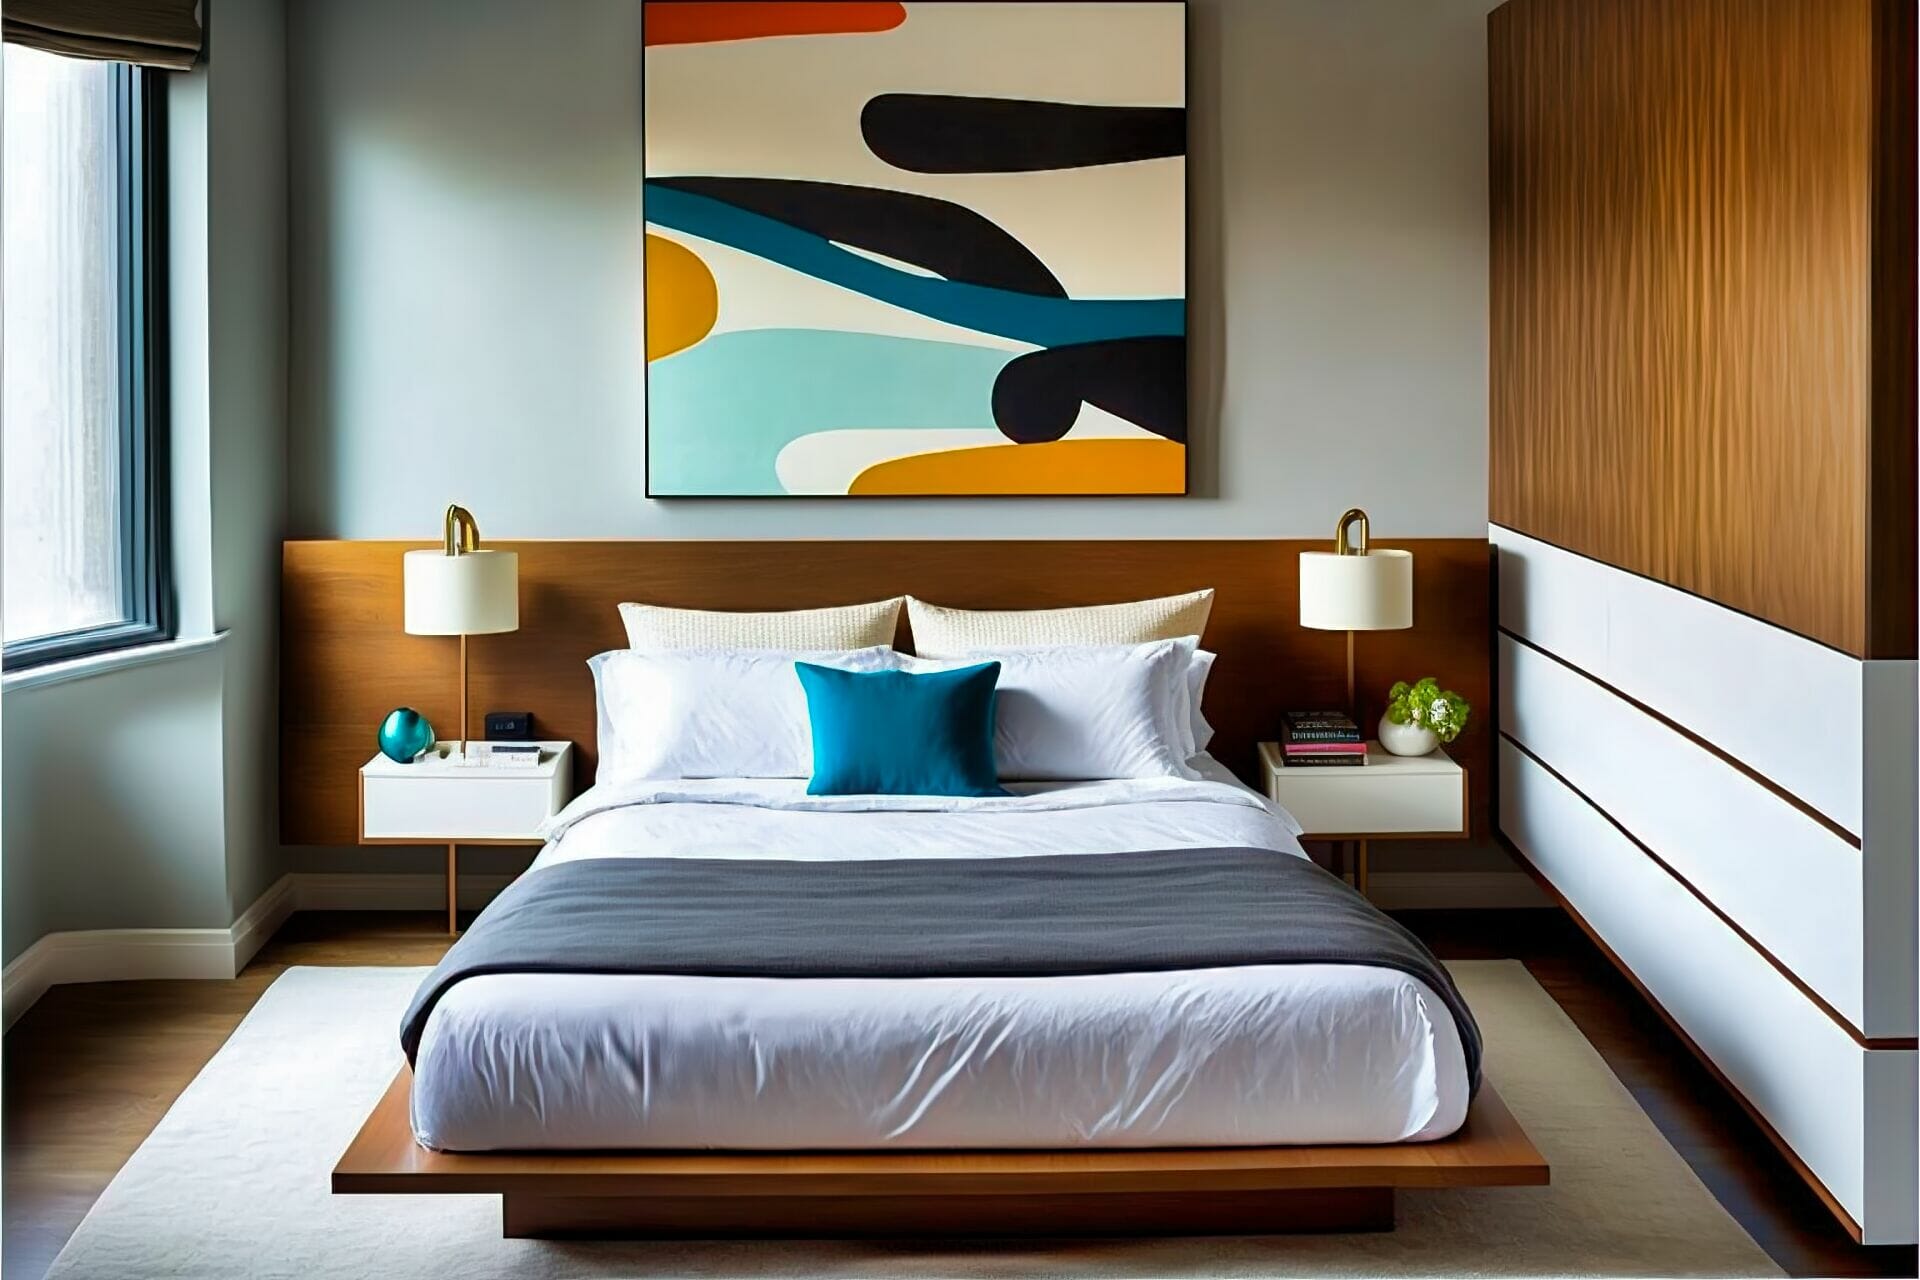 Mid-Century Modern Bedroom – A Contemporary Modern Bedroom Featuring A Low-Profile Platform Bed With A Clean-Lined Headboard, A White Lacquered Nightstand, And A Modern Abstract Art Piece Hung Above The Bed.